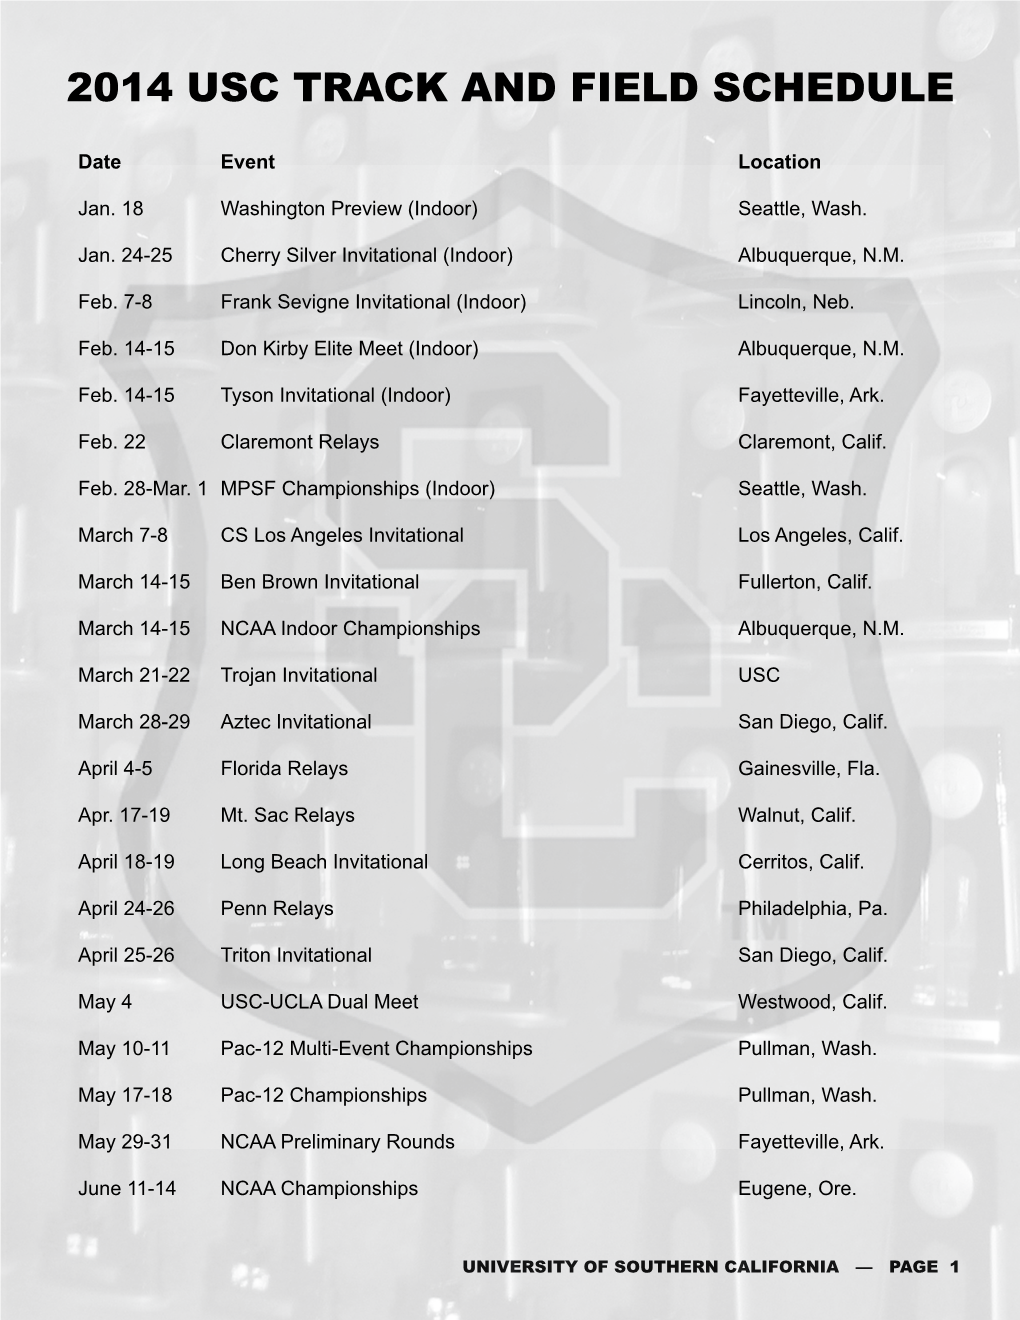 2014 Usc Track and Field Schedule